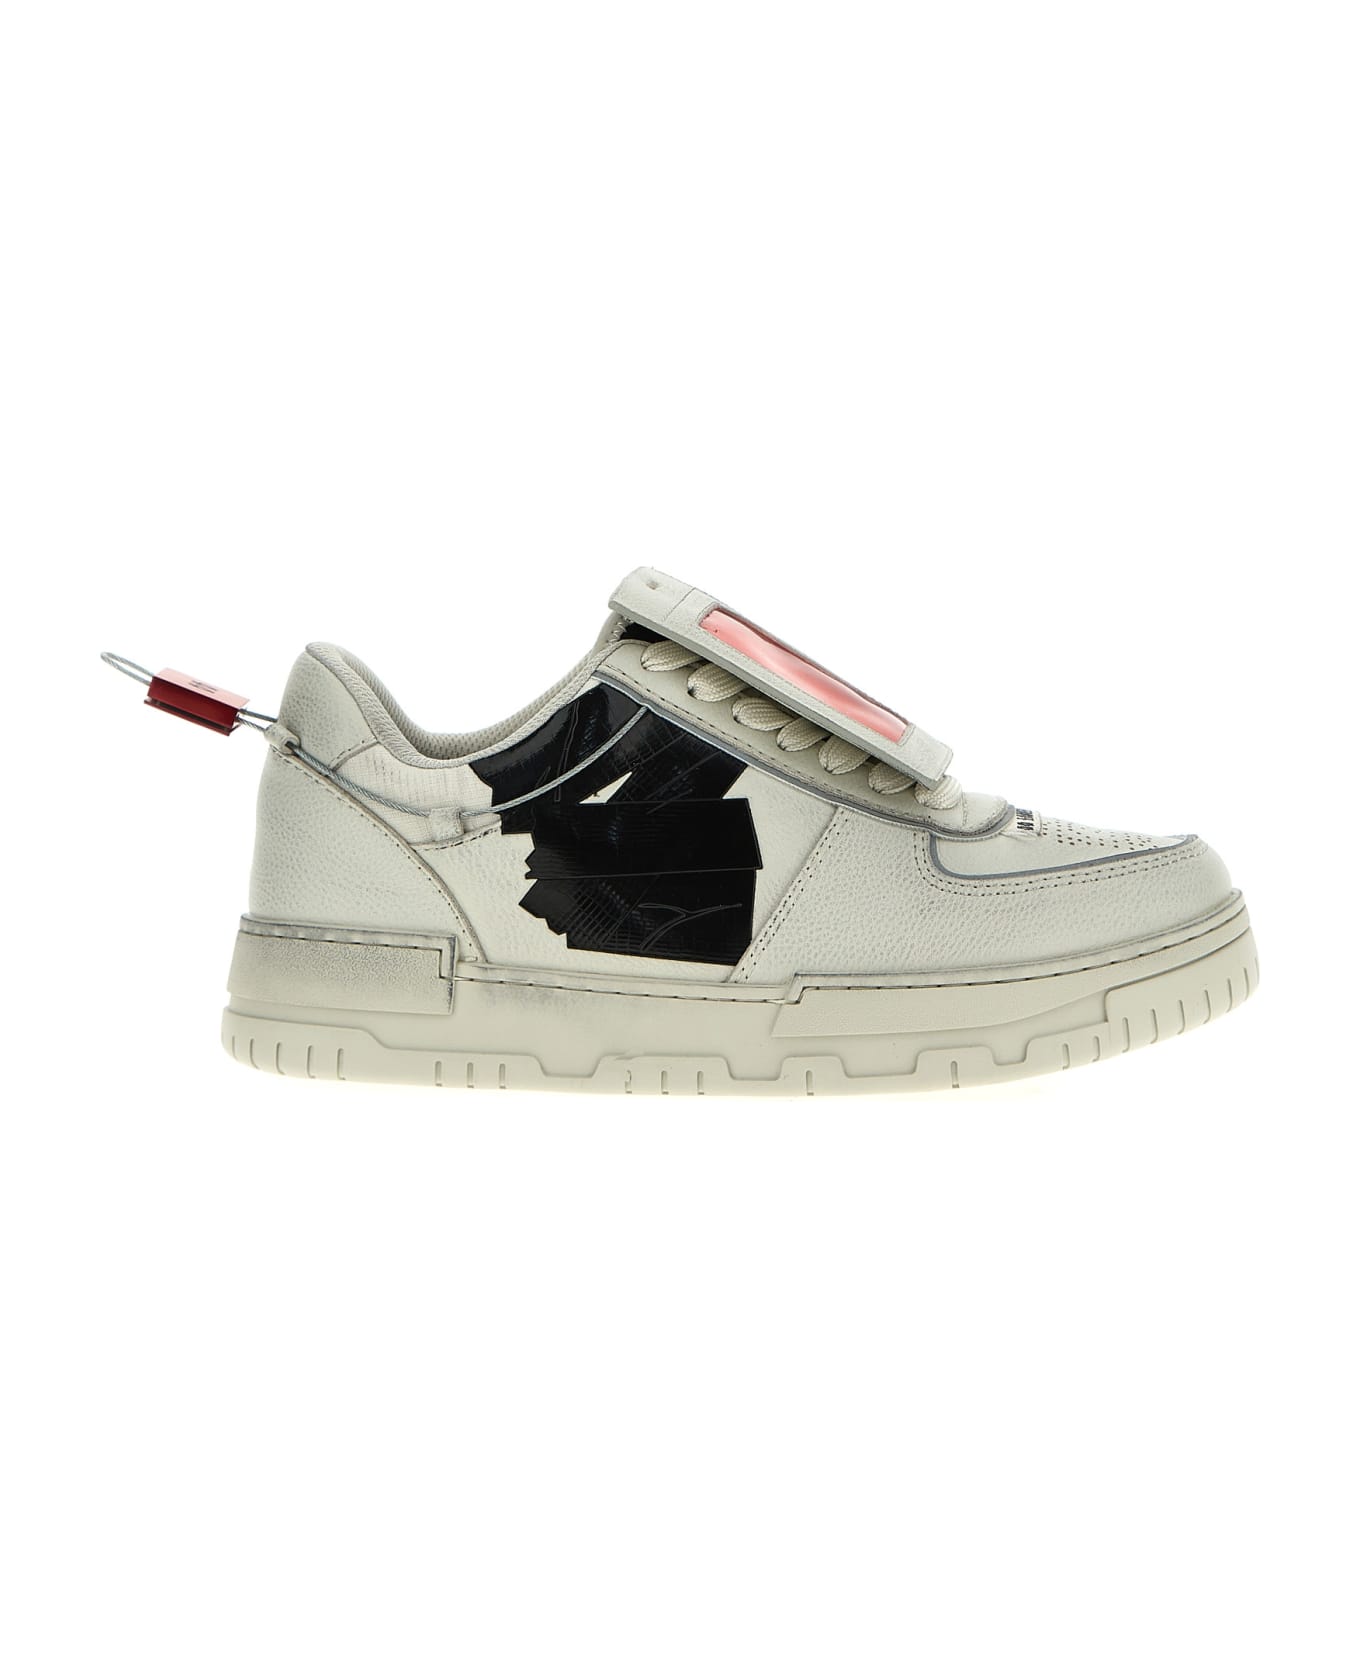 44 Label Group 'avril' Sneakers - Multicolor